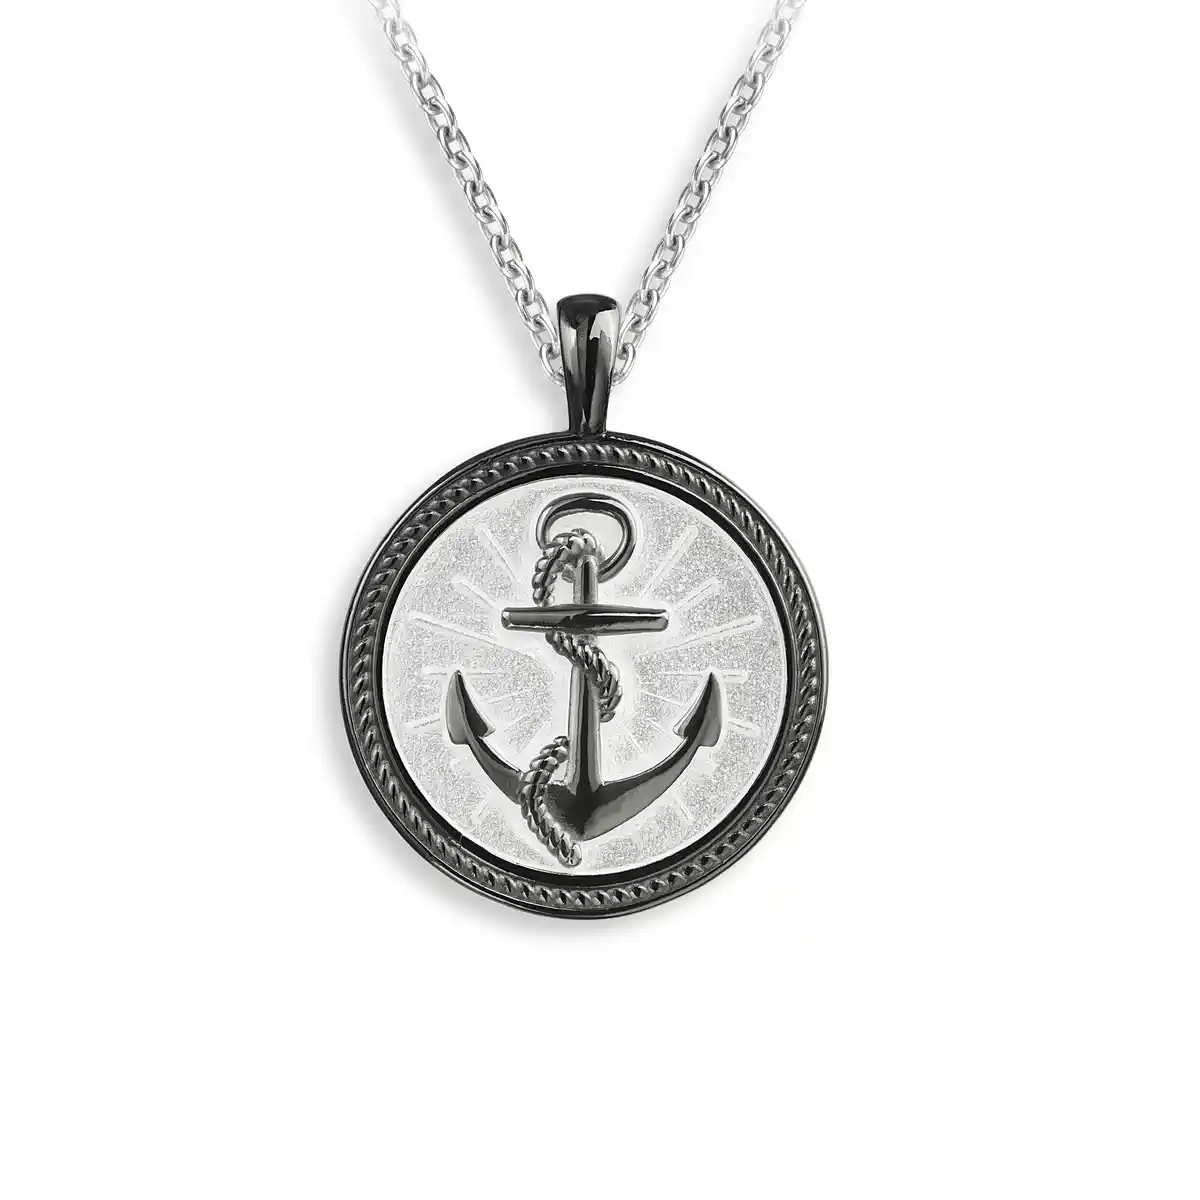 White Anchor with Rope Black Rhodium Plated Necklace. Sterling Silver